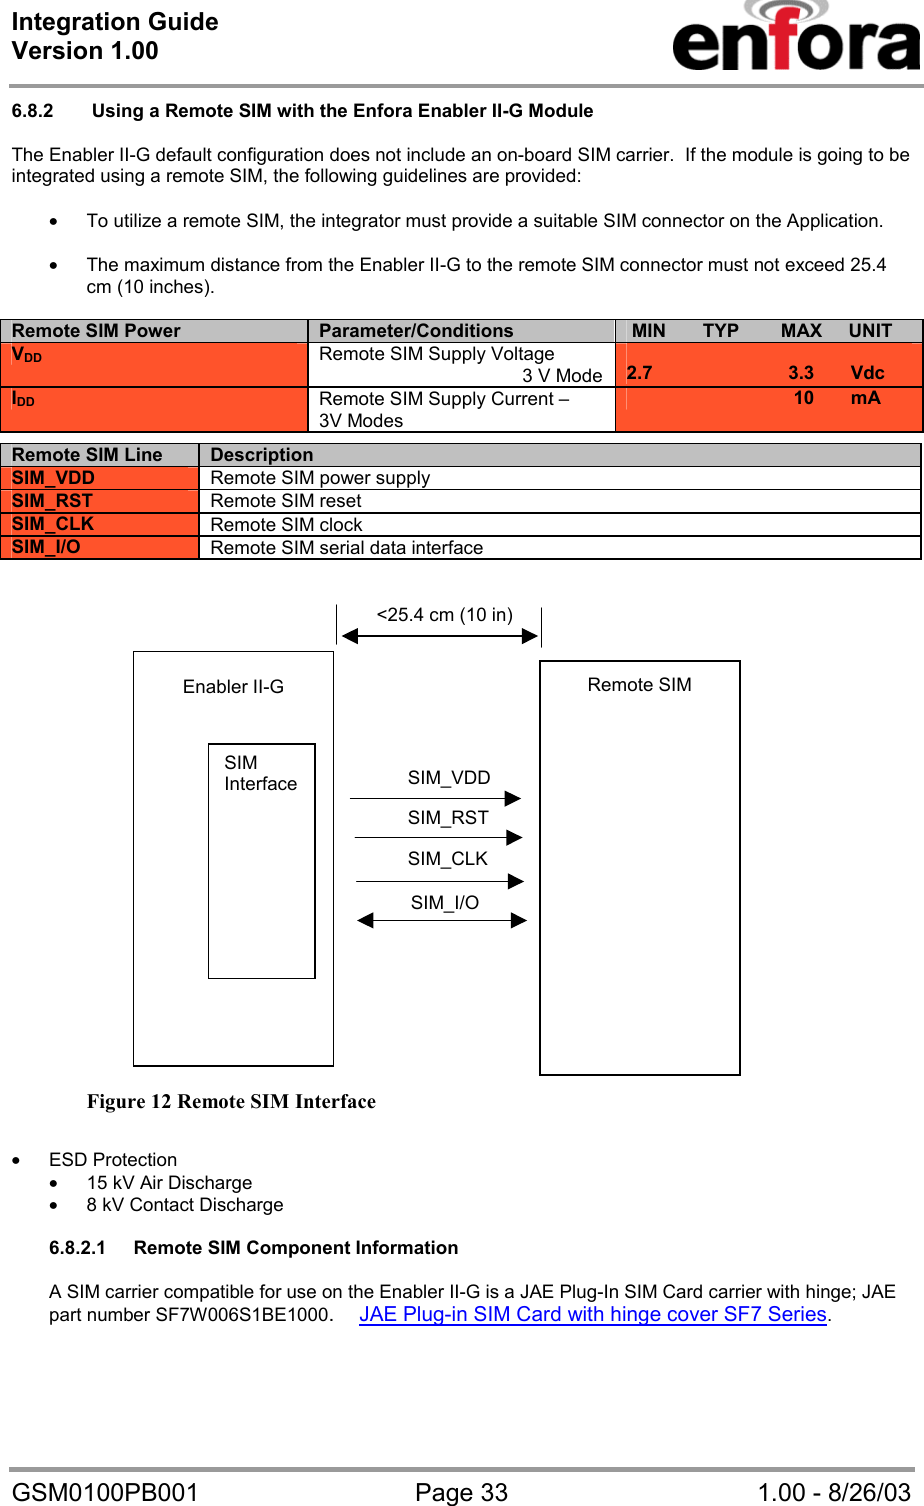 Integration Guide  Version 1.00   GSM0100PB001  Page 33  1.00 - 8/26/03 6.8.2   Using a Remote SIM with the Enfora Enabler II-G Module  The Enabler II-G default configuration does not include an on-board SIM carrier.  If the module is going to be integrated using a remote SIM, the following guidelines are provided:  • To utilize a remote SIM, the integrator must provide a suitable SIM connector on the Application.  • The maximum distance from the Enabler II-G to the remote SIM connector must not exceed 25.4 cm (10 inches).  Remote SIM Power Parameter/Conditions  MIN       TYP        MAX     UNIT VDD  Remote SIM Supply Voltage                                        3 V Mode  2.7                          3.3       Vdc        IDD Remote SIM Supply Current –  3V Modes                                 10       mA                           Figure 12 Remote SIM Interface  • ESD Protection • 15 kV Air Discharge • 8 kV Contact Discharge  6.8.2.1  Remote SIM Component Information  A SIM carrier compatible for use on the Enabler II-G is a JAE Plug-In SIM Card carrier with hinge; JAE part number SF7W006S1BE1000.JAE Plug-in SIM Card with hinge cover SF7 Series.   Remote SIM Line Description SIM_VDD Remote SIM power supply SIM_RST  Remote SIM reset SIM_CLK  Remote SIM clock SIM_I/O  Remote SIM serial data interface SIM_CLK&lt;25.4 cm (10 in)SIM_I/OSIM_RSTSIM_VDDEnabler II-G SIM Interface Remote SIM 